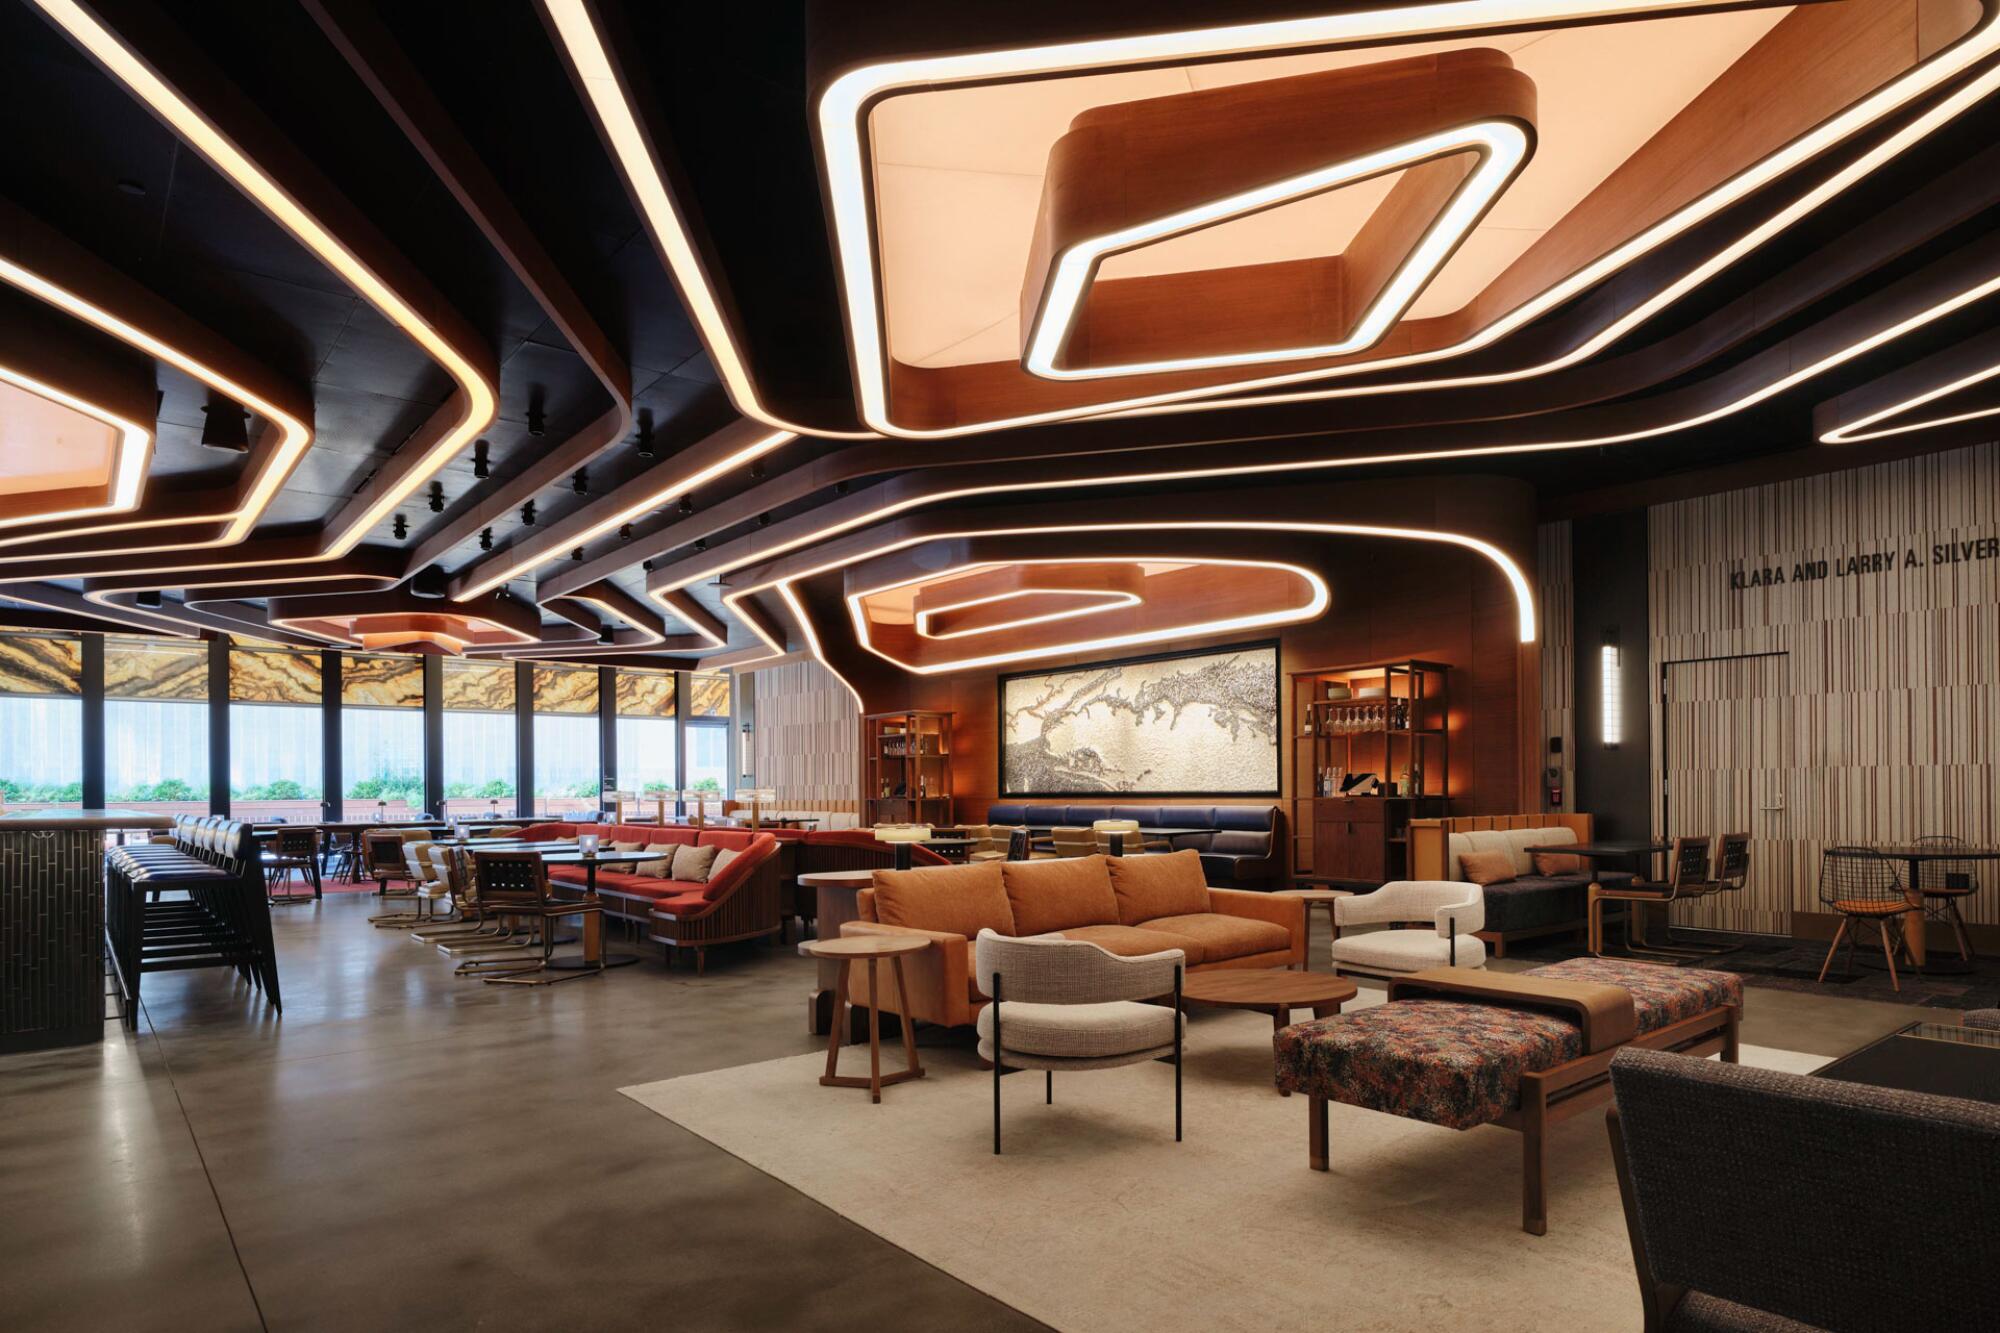 A restaurant sheathed in wood and warm earth tones features a geometric elements on the ceiling bordered with lighting.